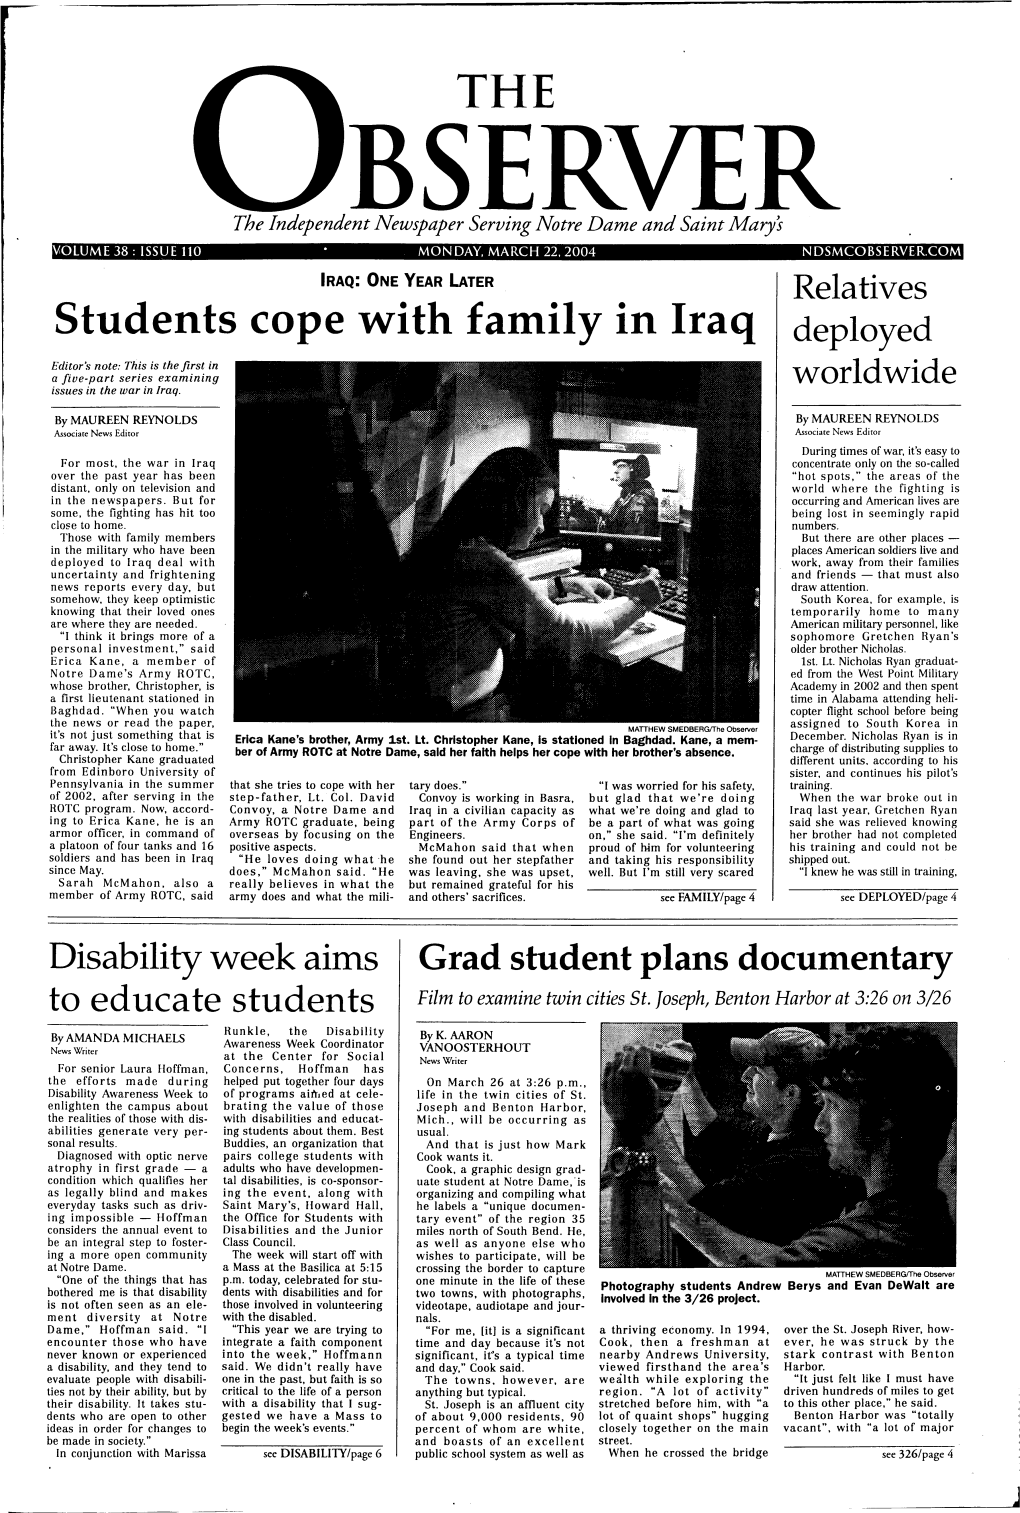 THE Students Cope with Family in Iraq